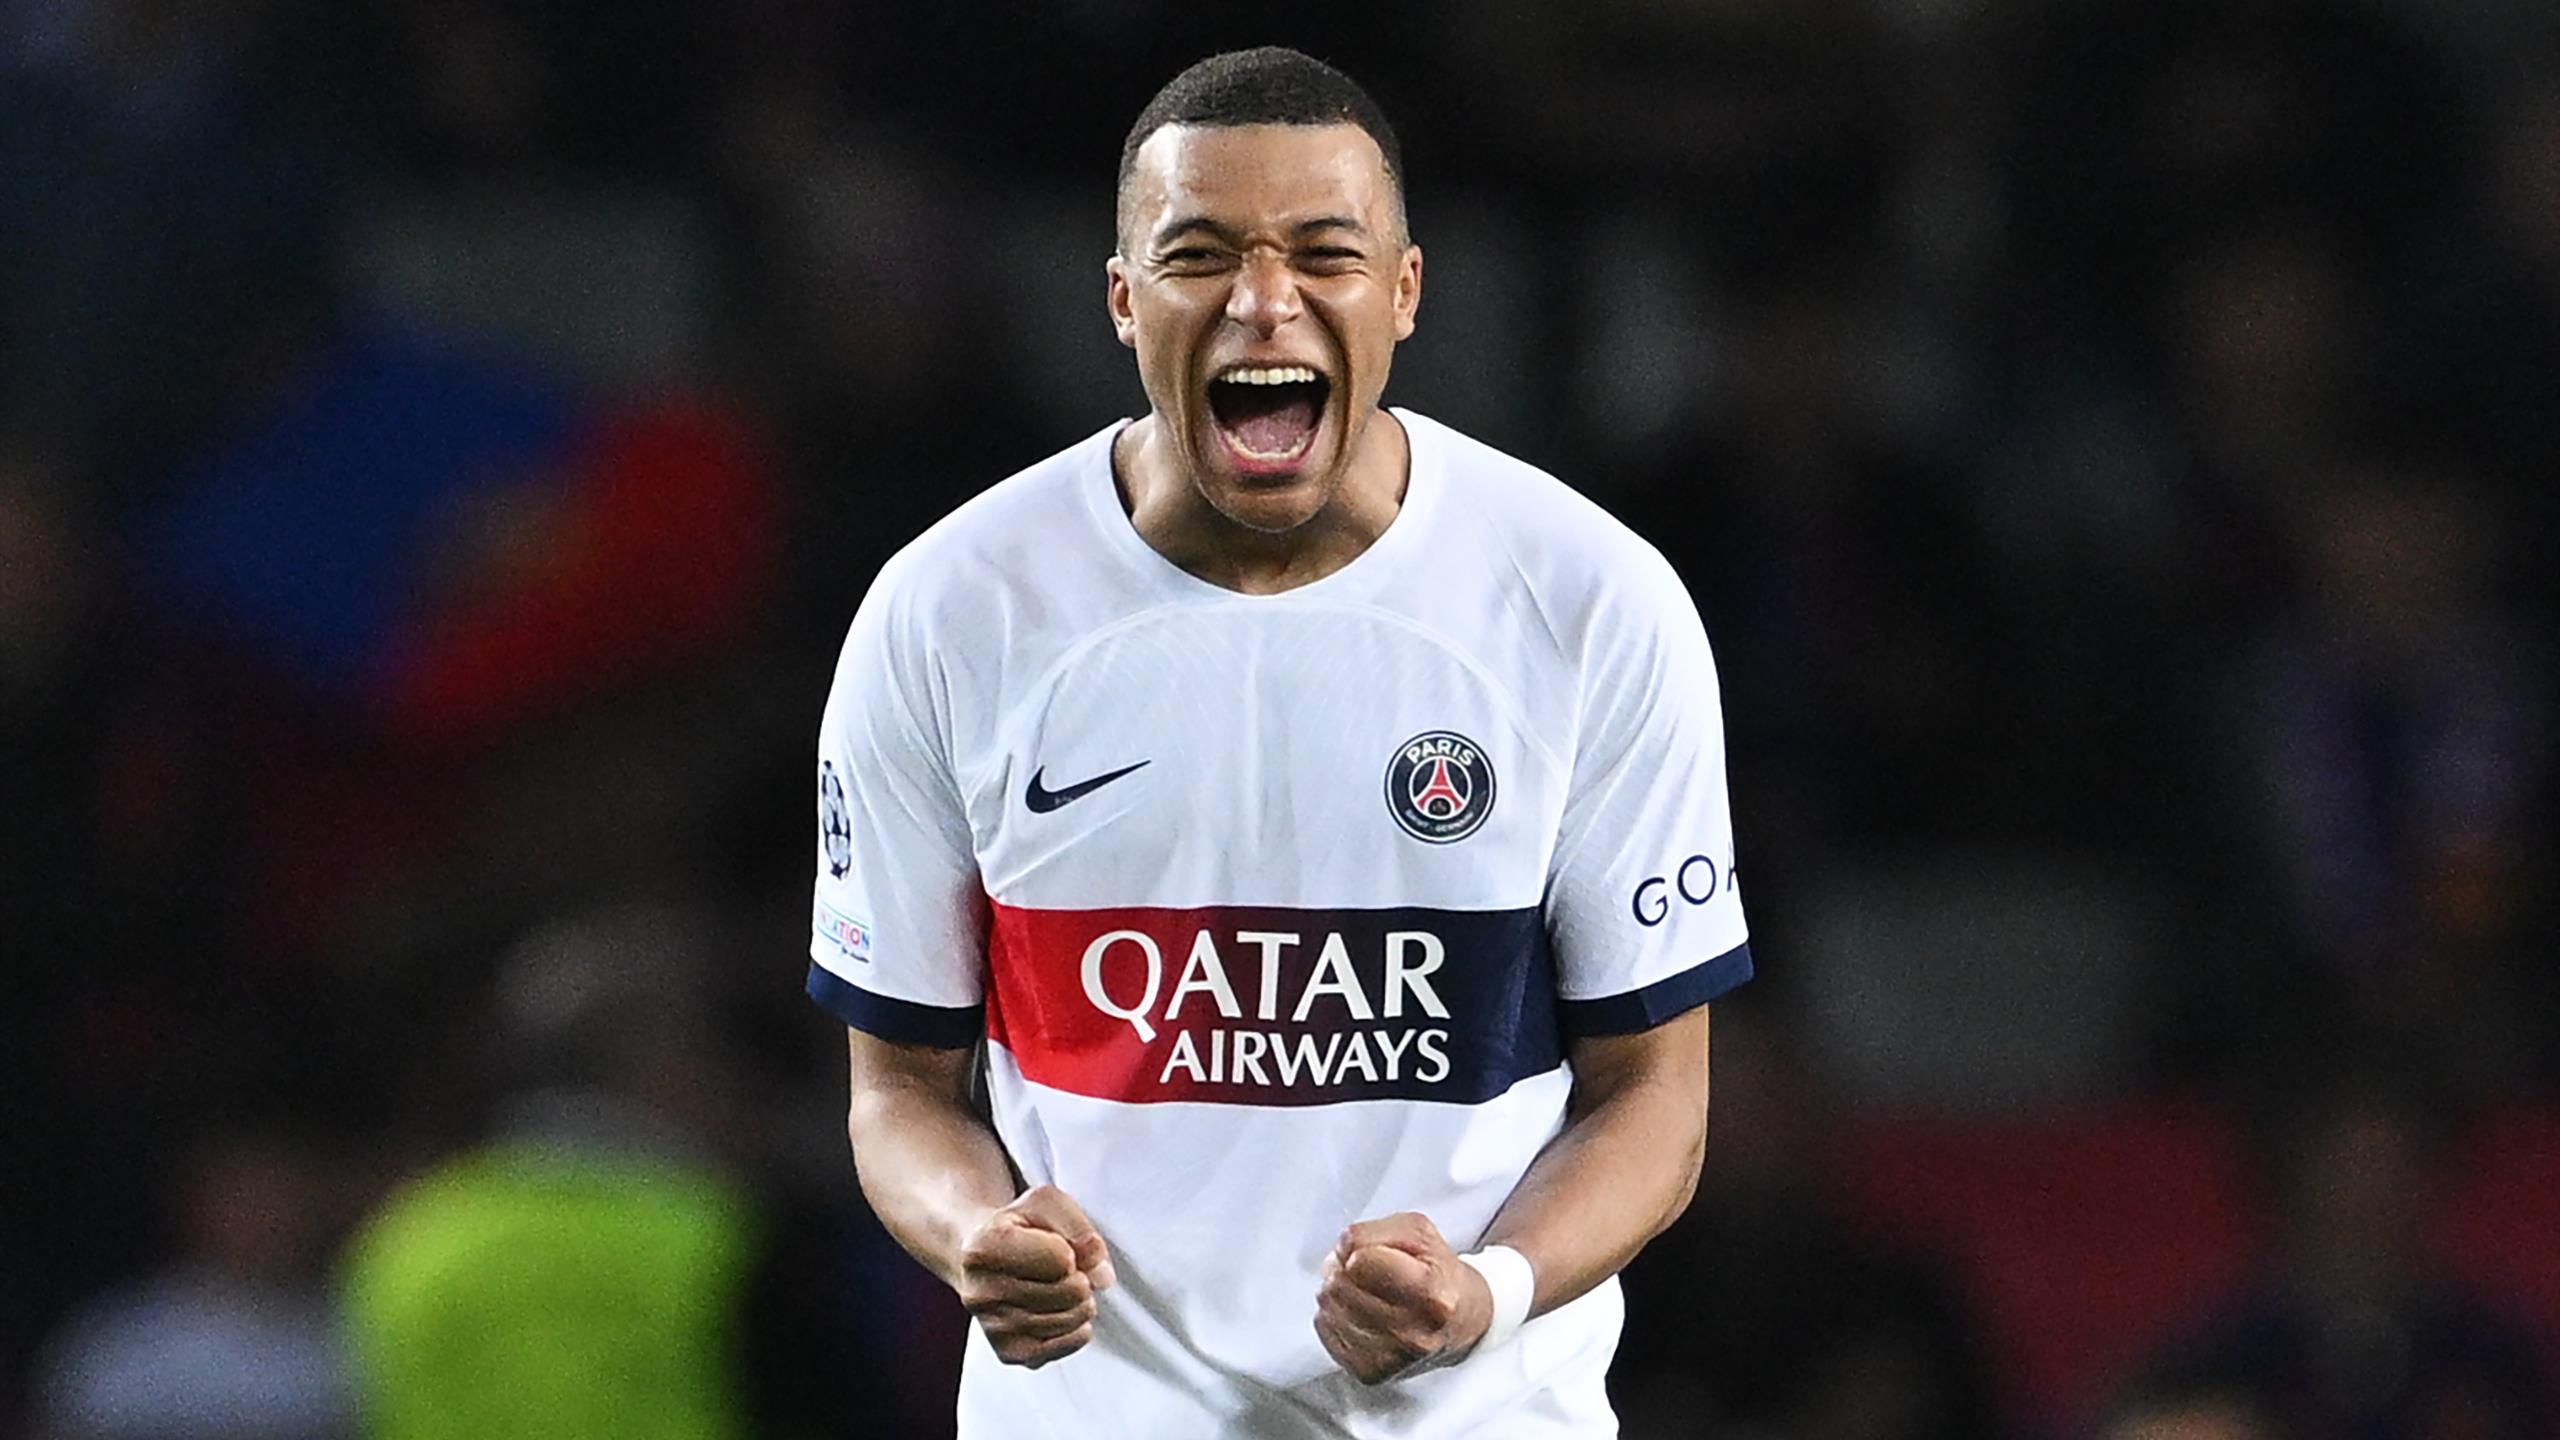 Transfer Talk: Real Madrid to confirm signing of Kylian Mbappe next Week